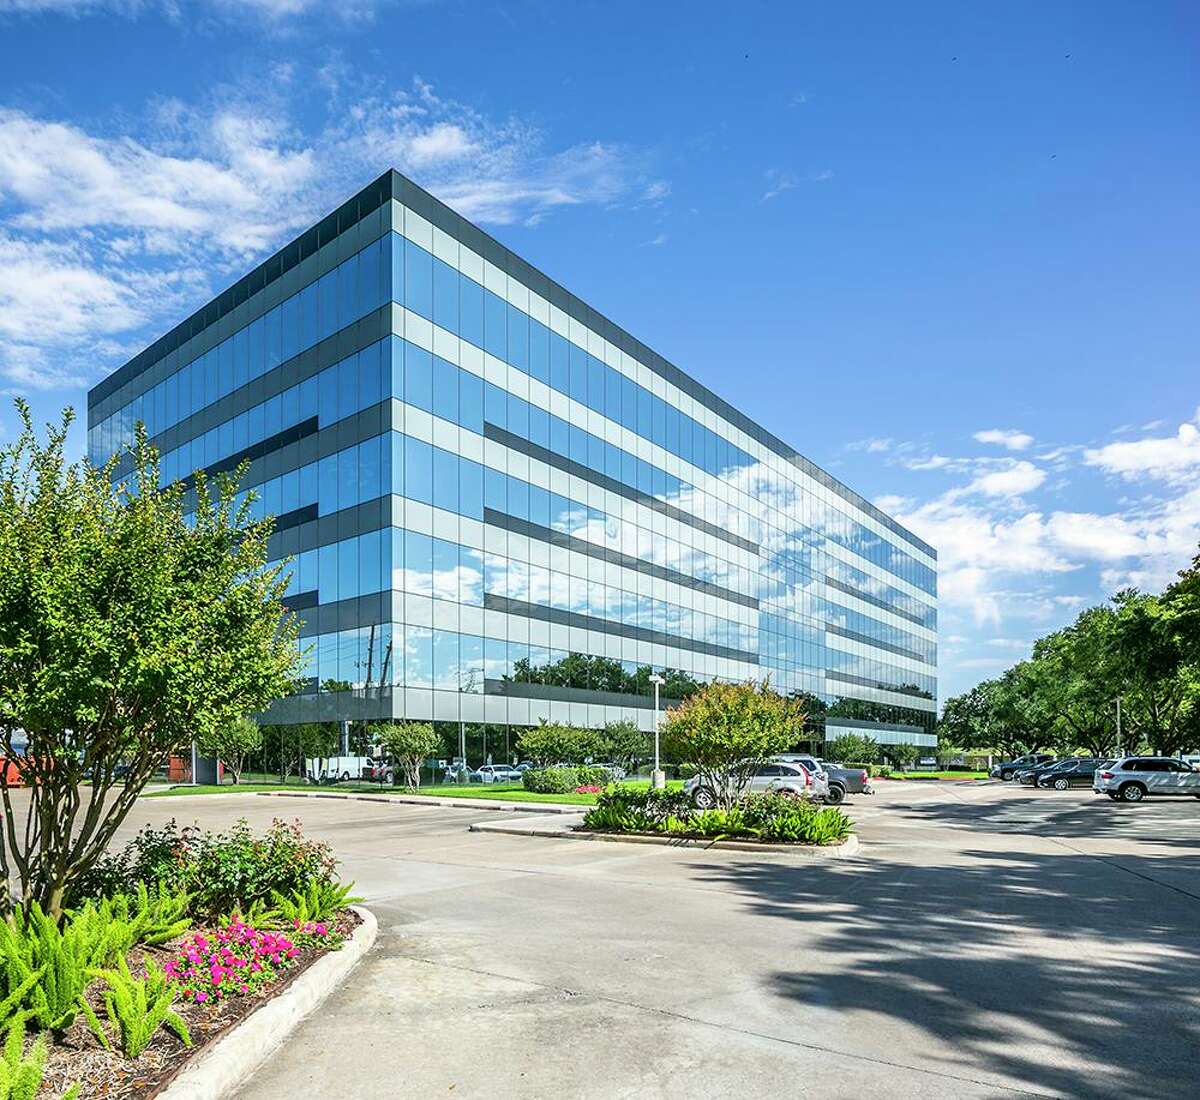 Rycore Capital purchased the 155,407-square-foot 1311 Broadfield Blvd office building in the Energy Corridor.